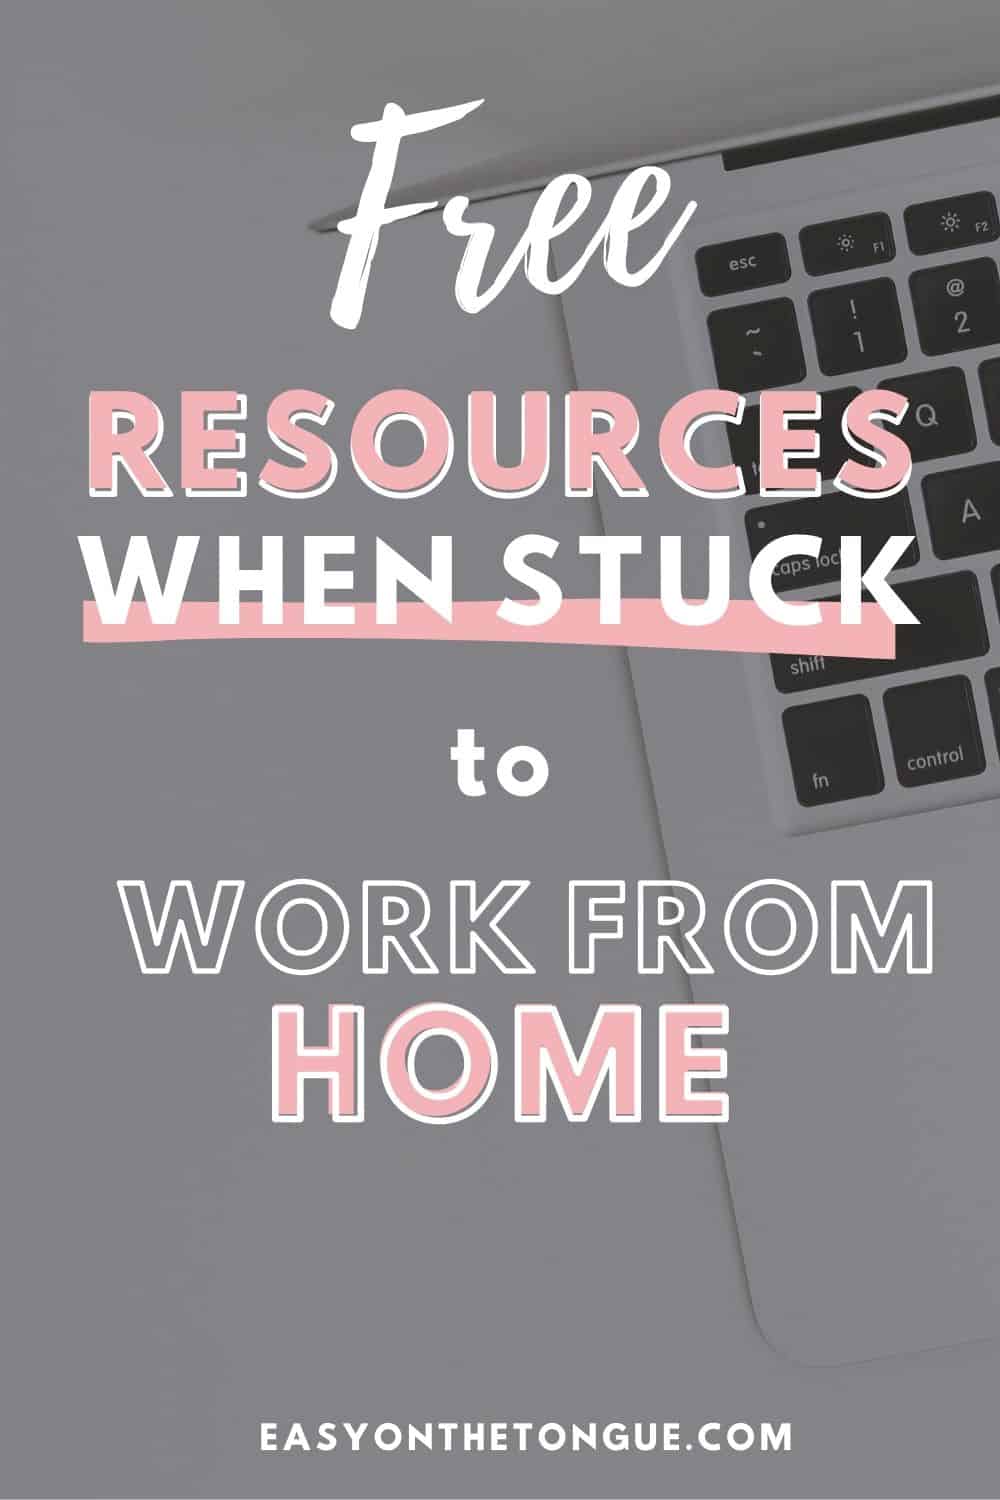 Free Resources when stuck to Work from Home